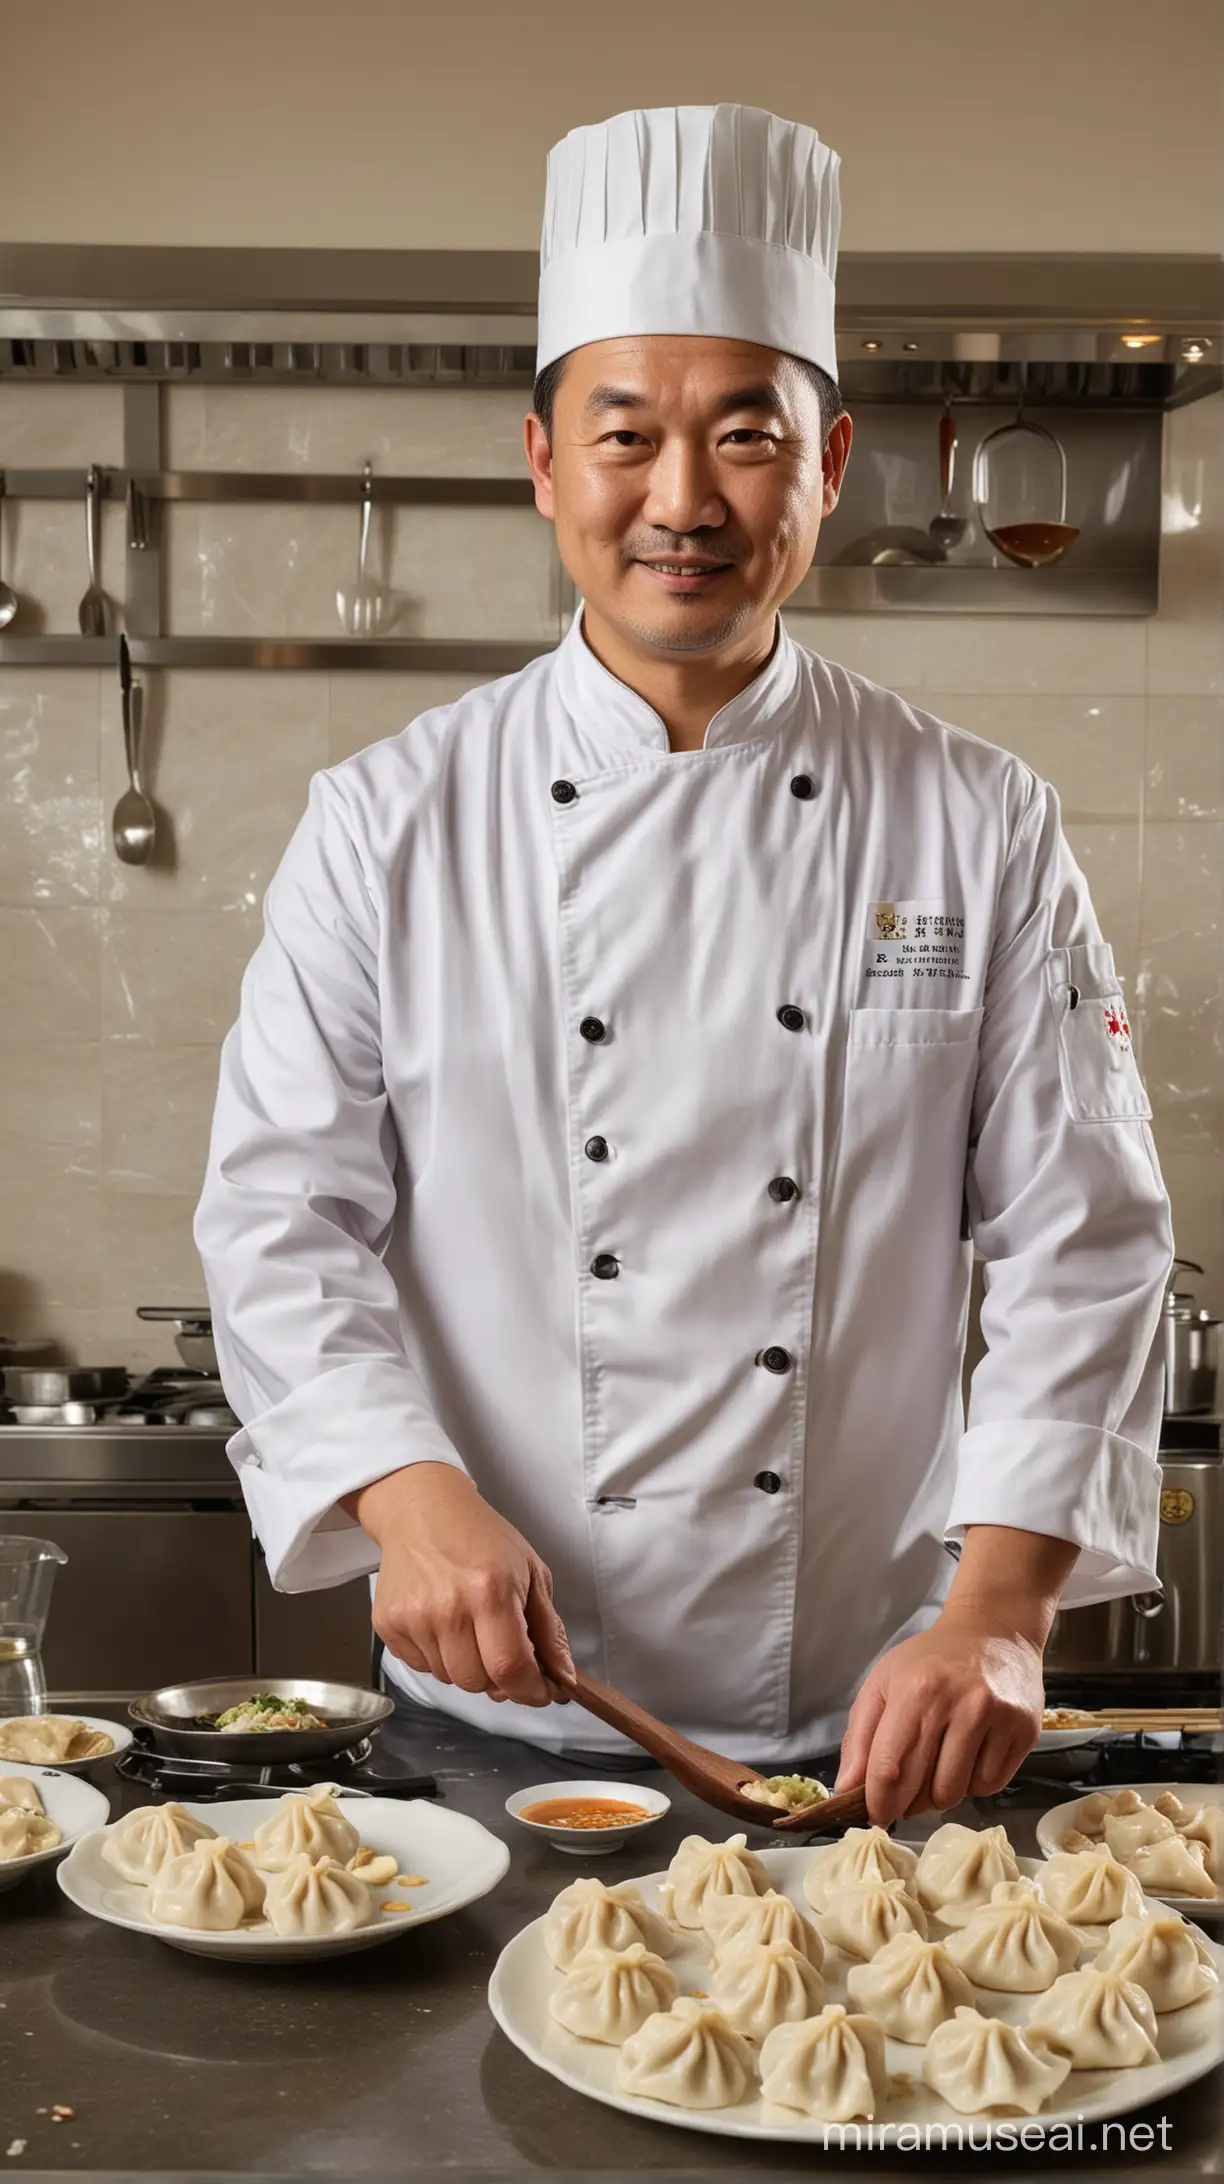 Experienced Chinese Chef Crafting Dumplings in Luxurious Hotel Kitchen